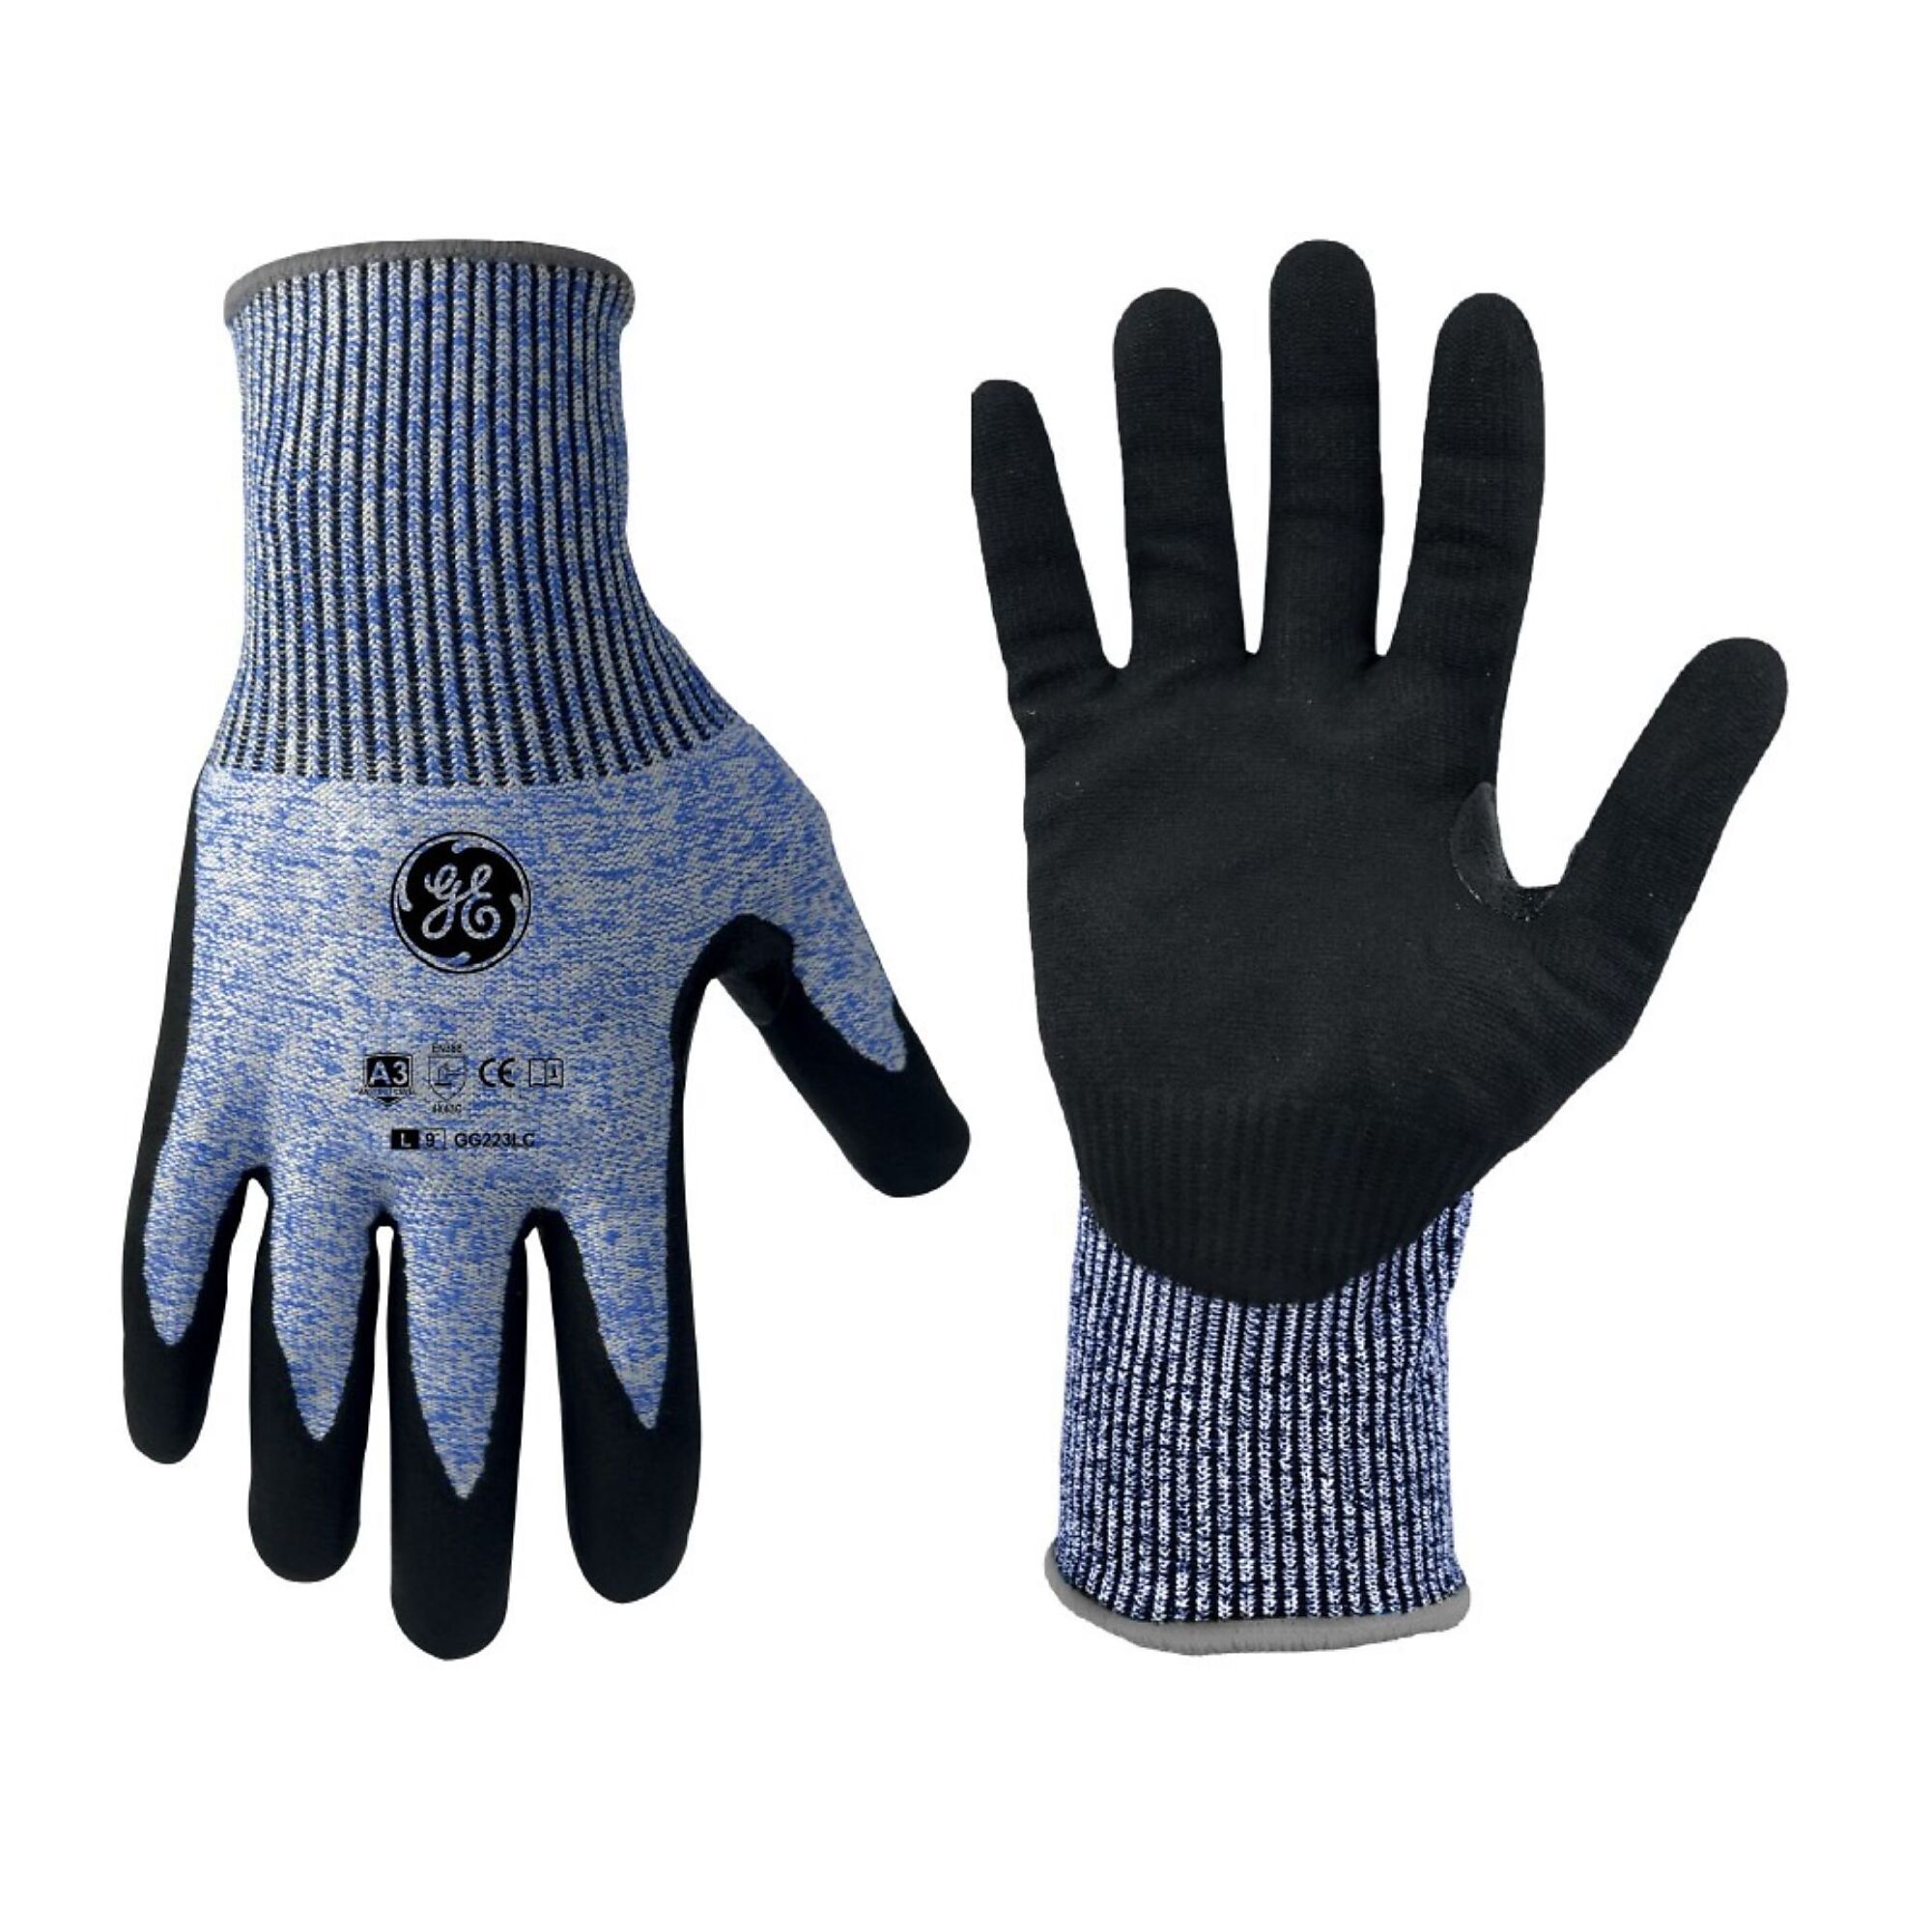 General Electric, Unisex Dipped Gloves Black/Blue L 12 pair, Size L, Included (qty.) 12, Model GG223L